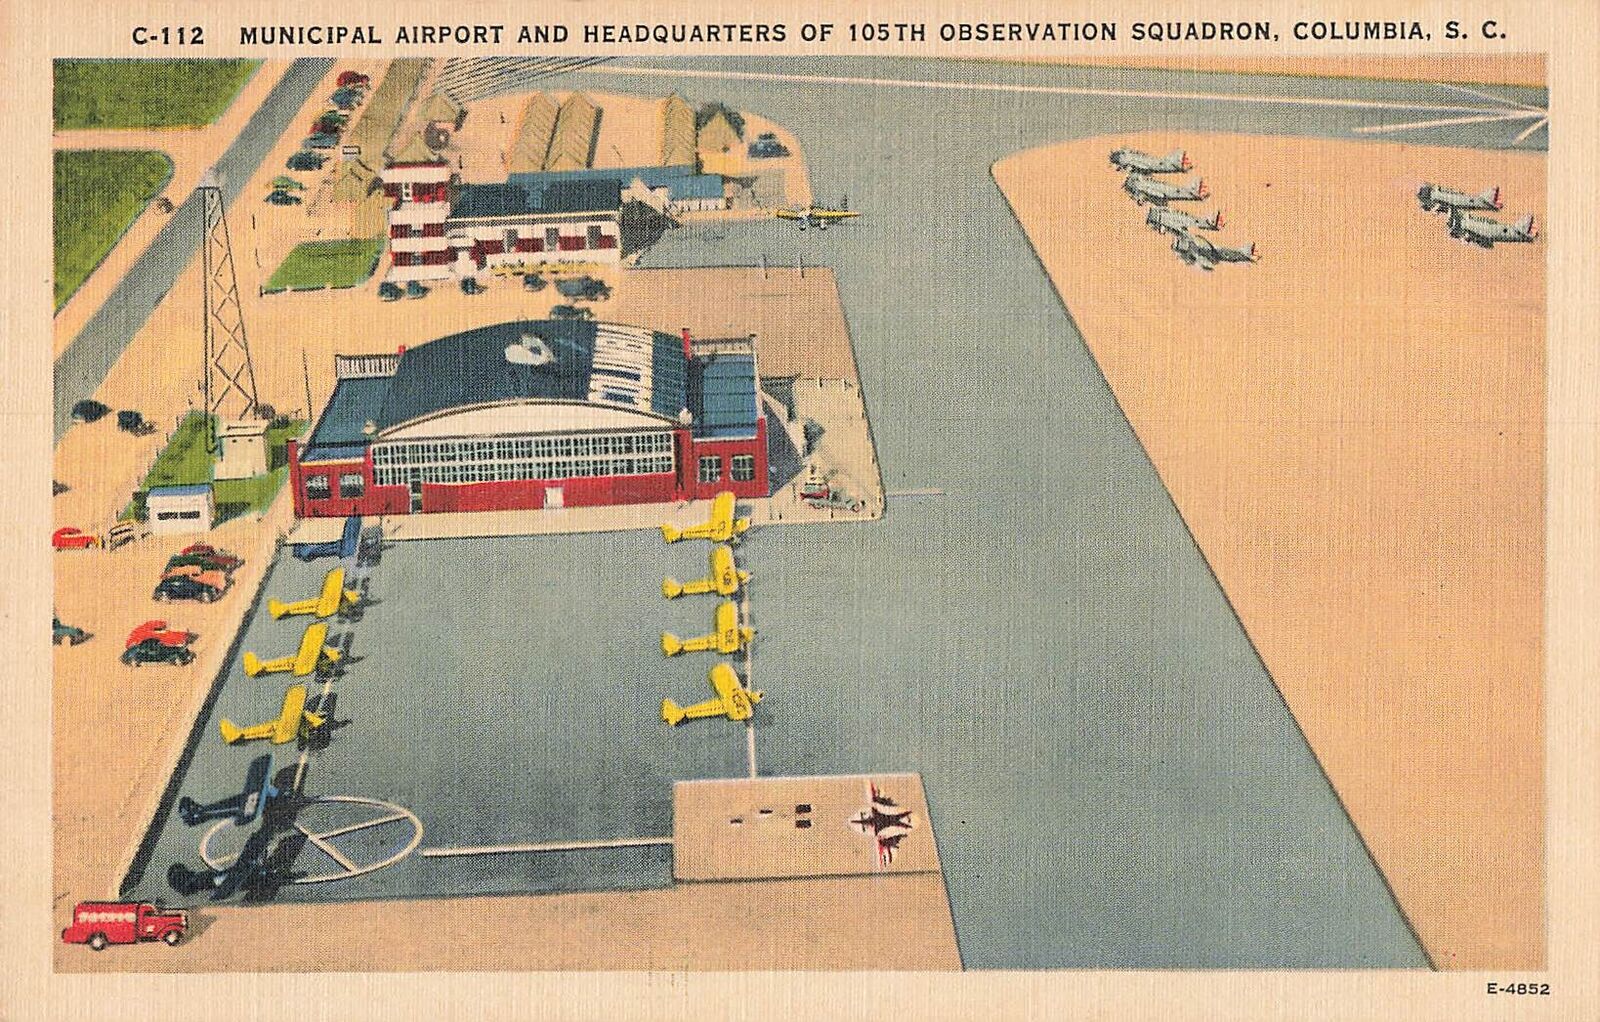 Vintage Postcard Airport/H.Q of 105th Observation Squadron, Columbia, S.C. WW2